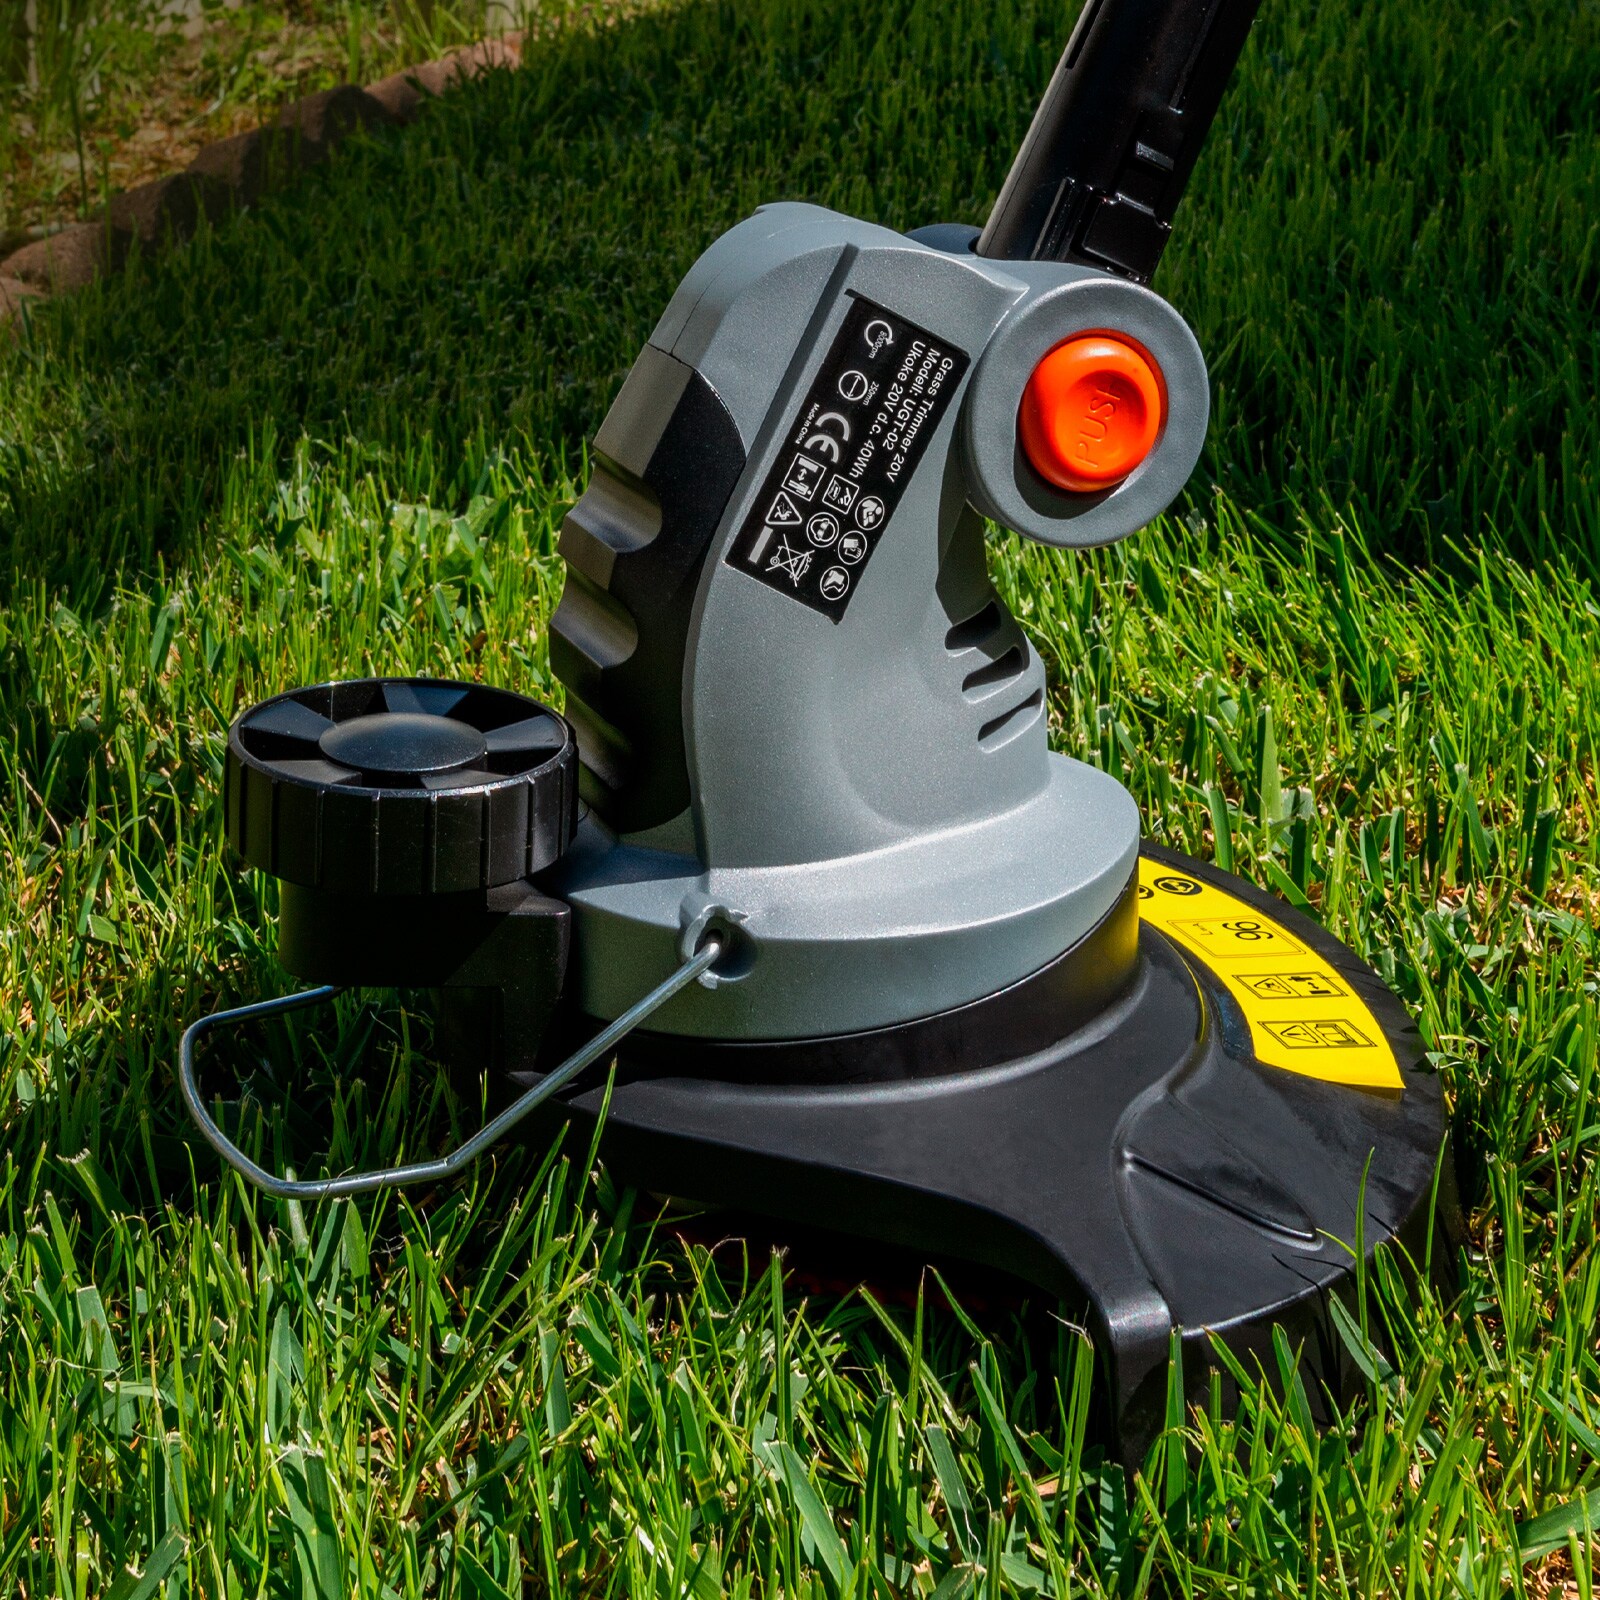 Silver & Black UKOKE U02TE Cordless Electric Power Grass Trimmer & Weed Wacker Renewed Edging and Trimmi 20V 2A Battery & Charger Included 